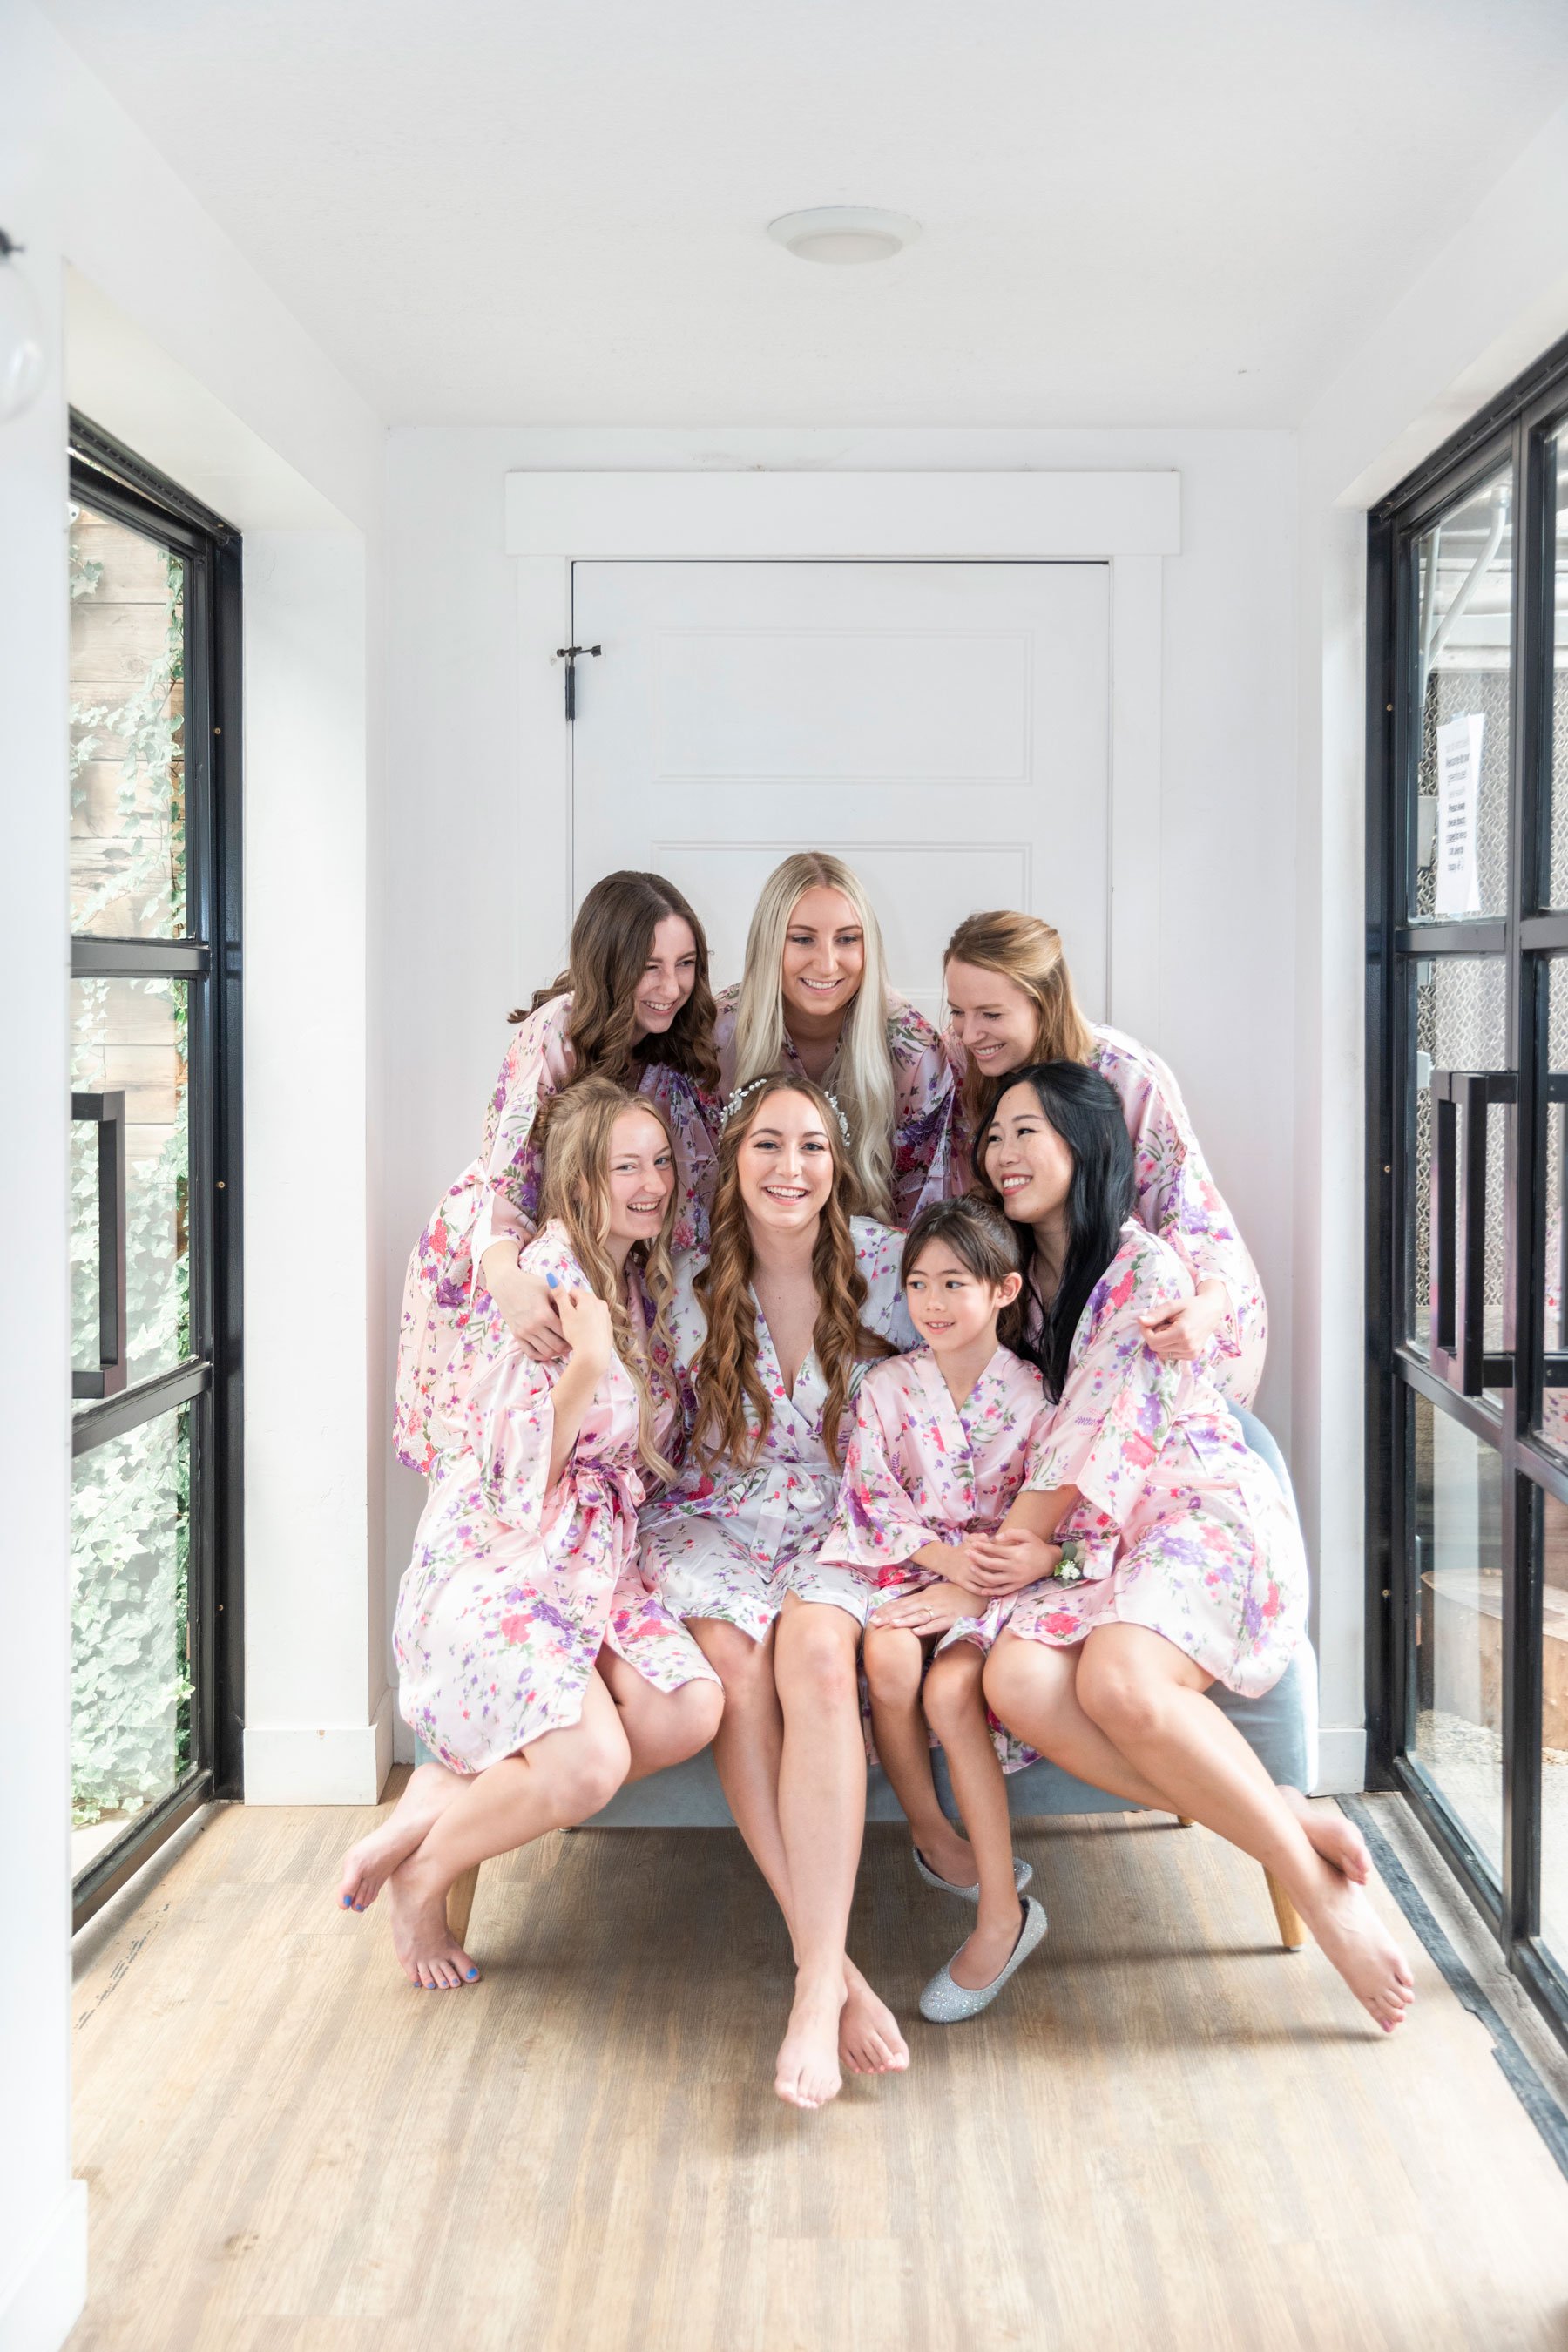  Bride with her cute bridesmaids in matching pink floral robes getting ready for a wedding by Savanna Richardson Photography, a professional Orem wedding photographer. bride with bridesmaids floral matching robes pink bridesmaids robes #savannarichar